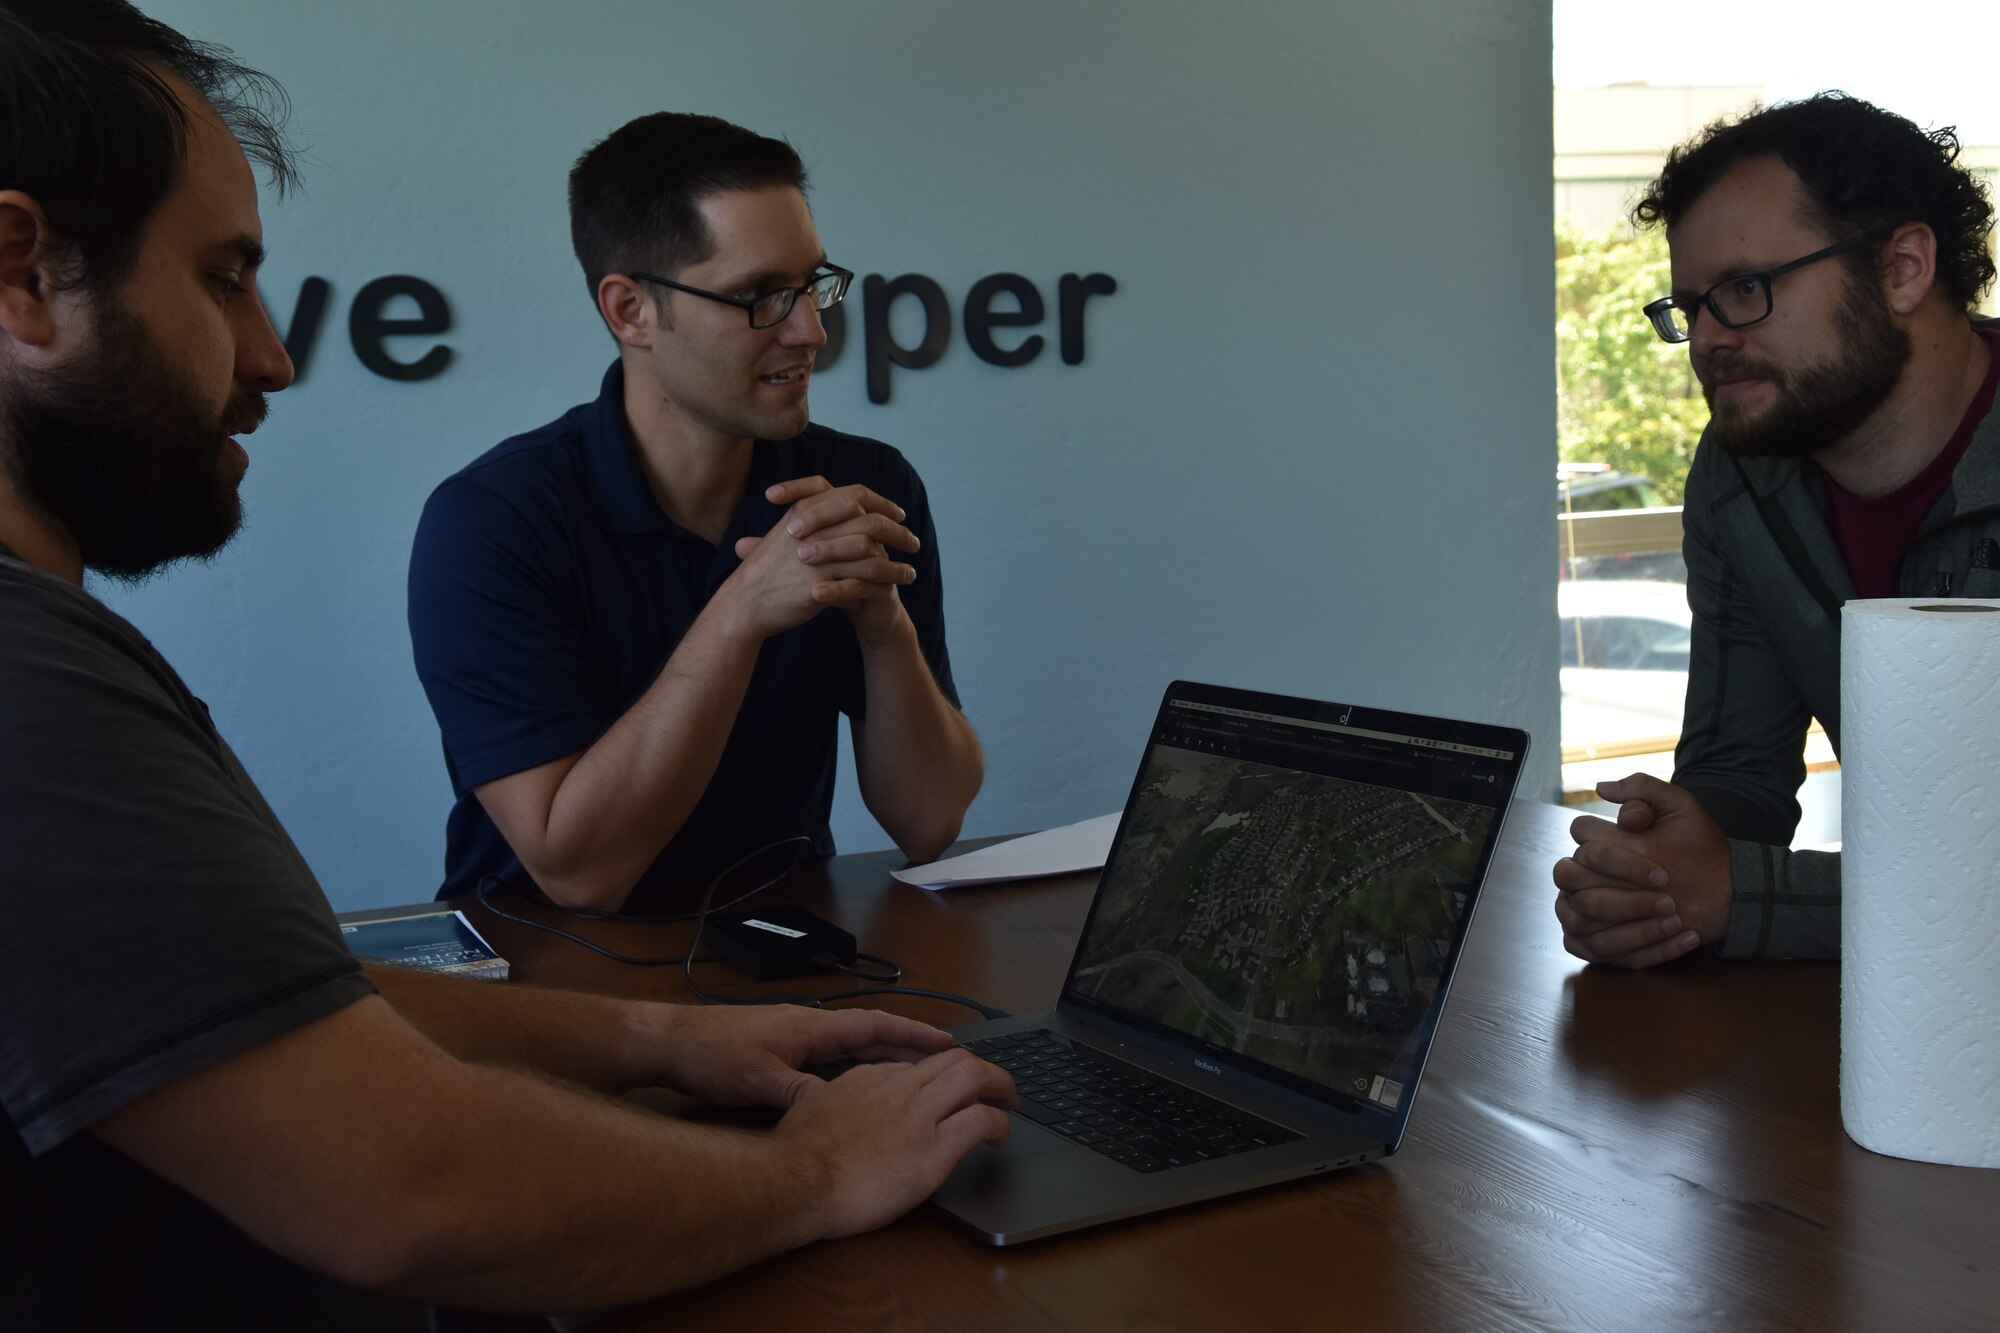 Will Urbina, Hivemapper head of flight operations, meets with Master Sgt. Nathaniel May, 9th Intelligence Squadron operations superintendent, and Dane Perry, Hivemapper product head, at the software company in San Francisco, California, June 4, 2019. Beale members have been partnering with the Hivemapper team since late 2018, to utilize the program as a way to same time, money, and manpower, while improving security capabilities.  (U.S. Air Force photo by Tech. Sgt. Veronica Montes)